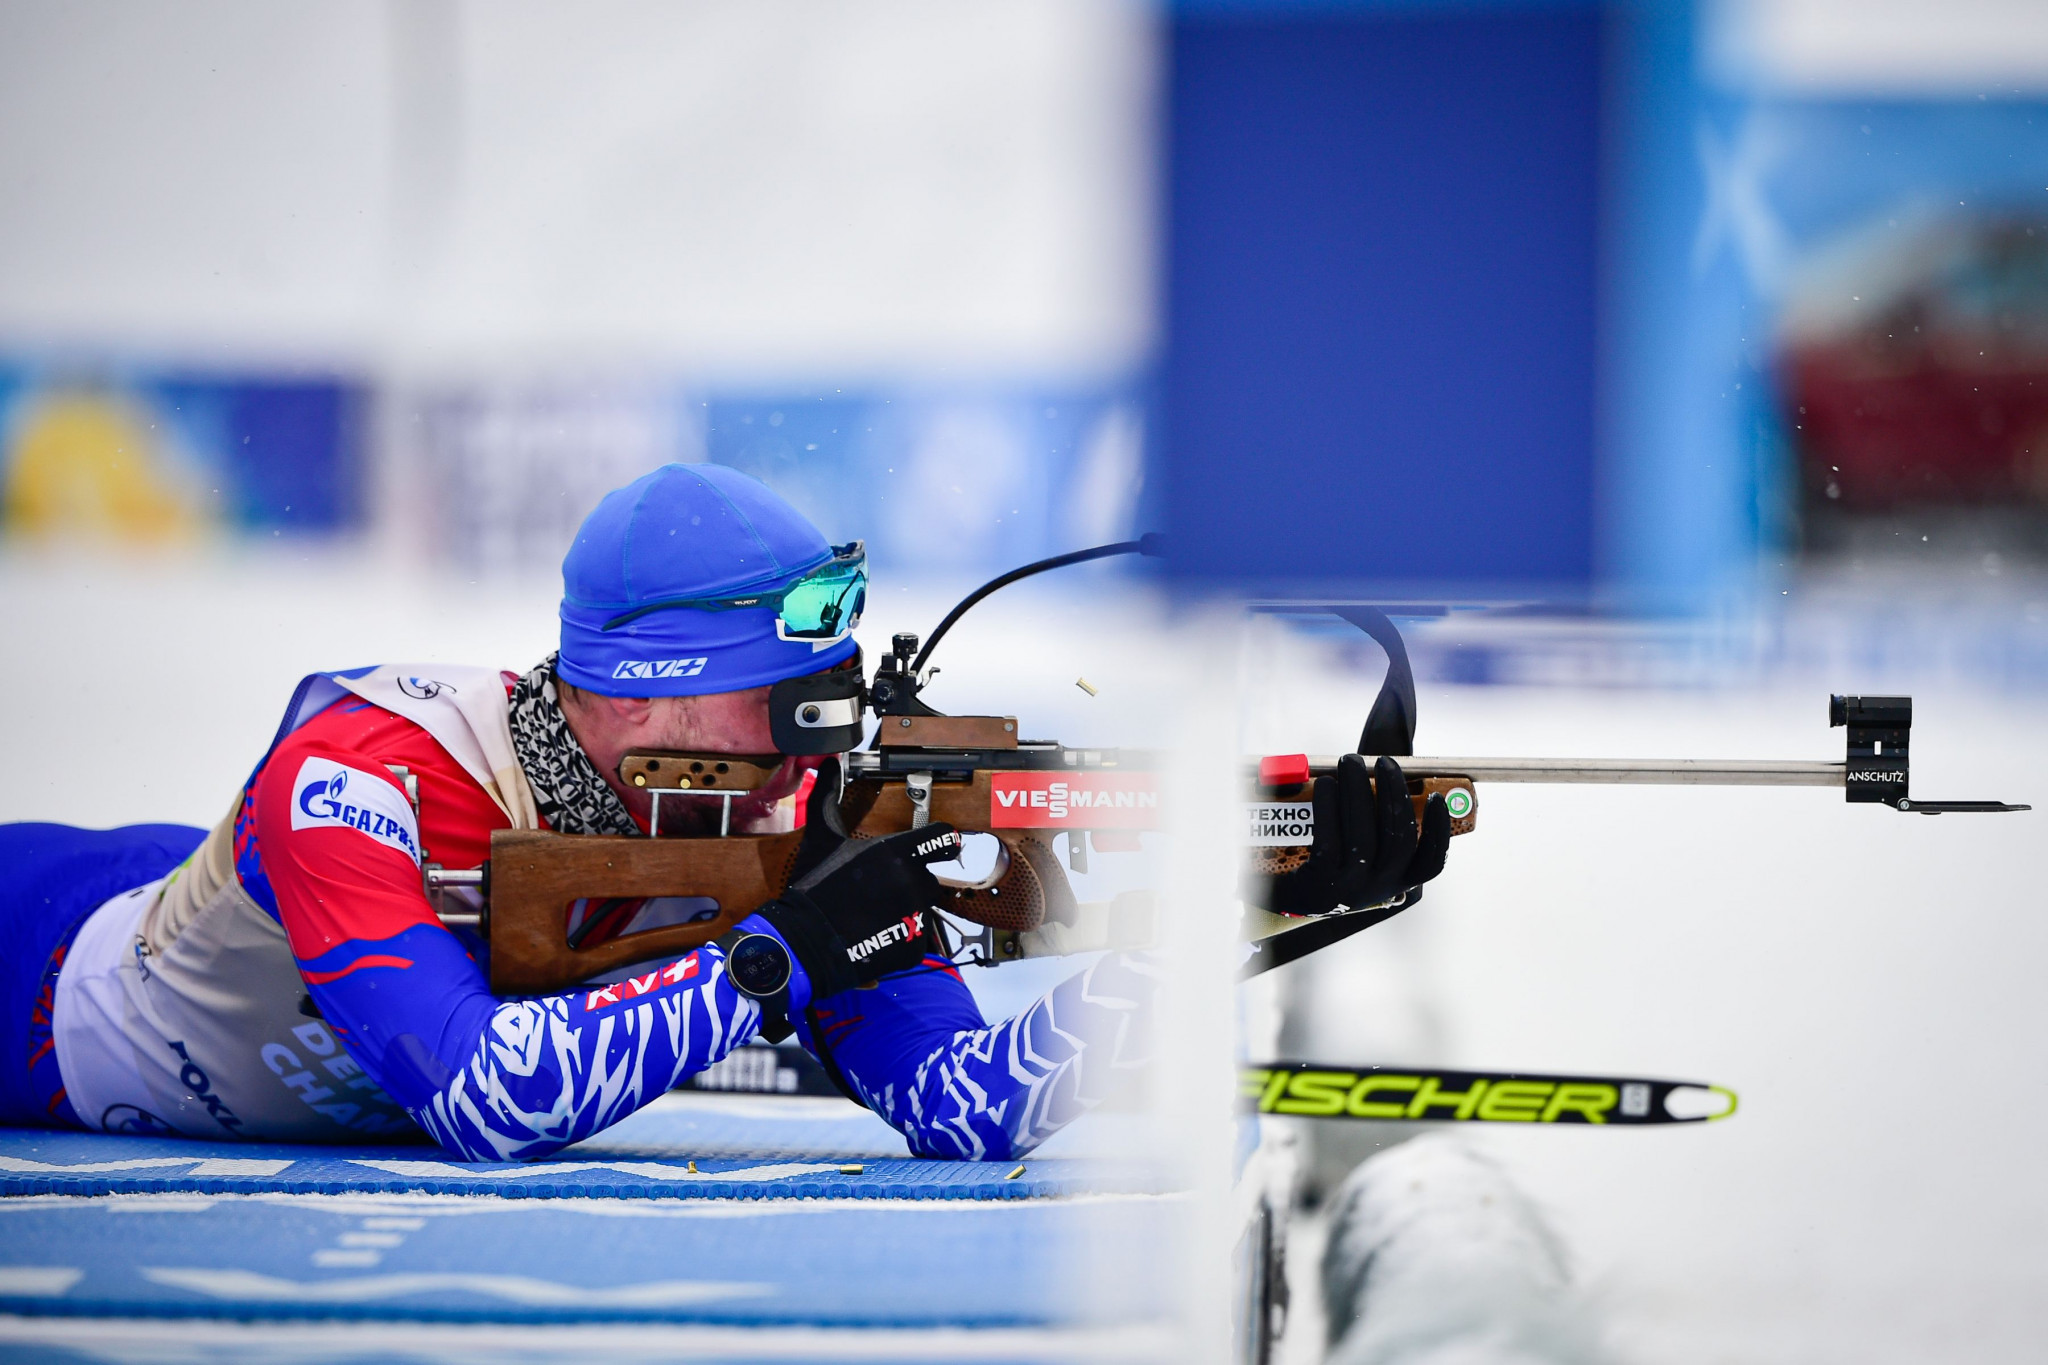 The Russian flag, emblems or symbols cannot be used by their team at the IBU World Championships ©Getty Images